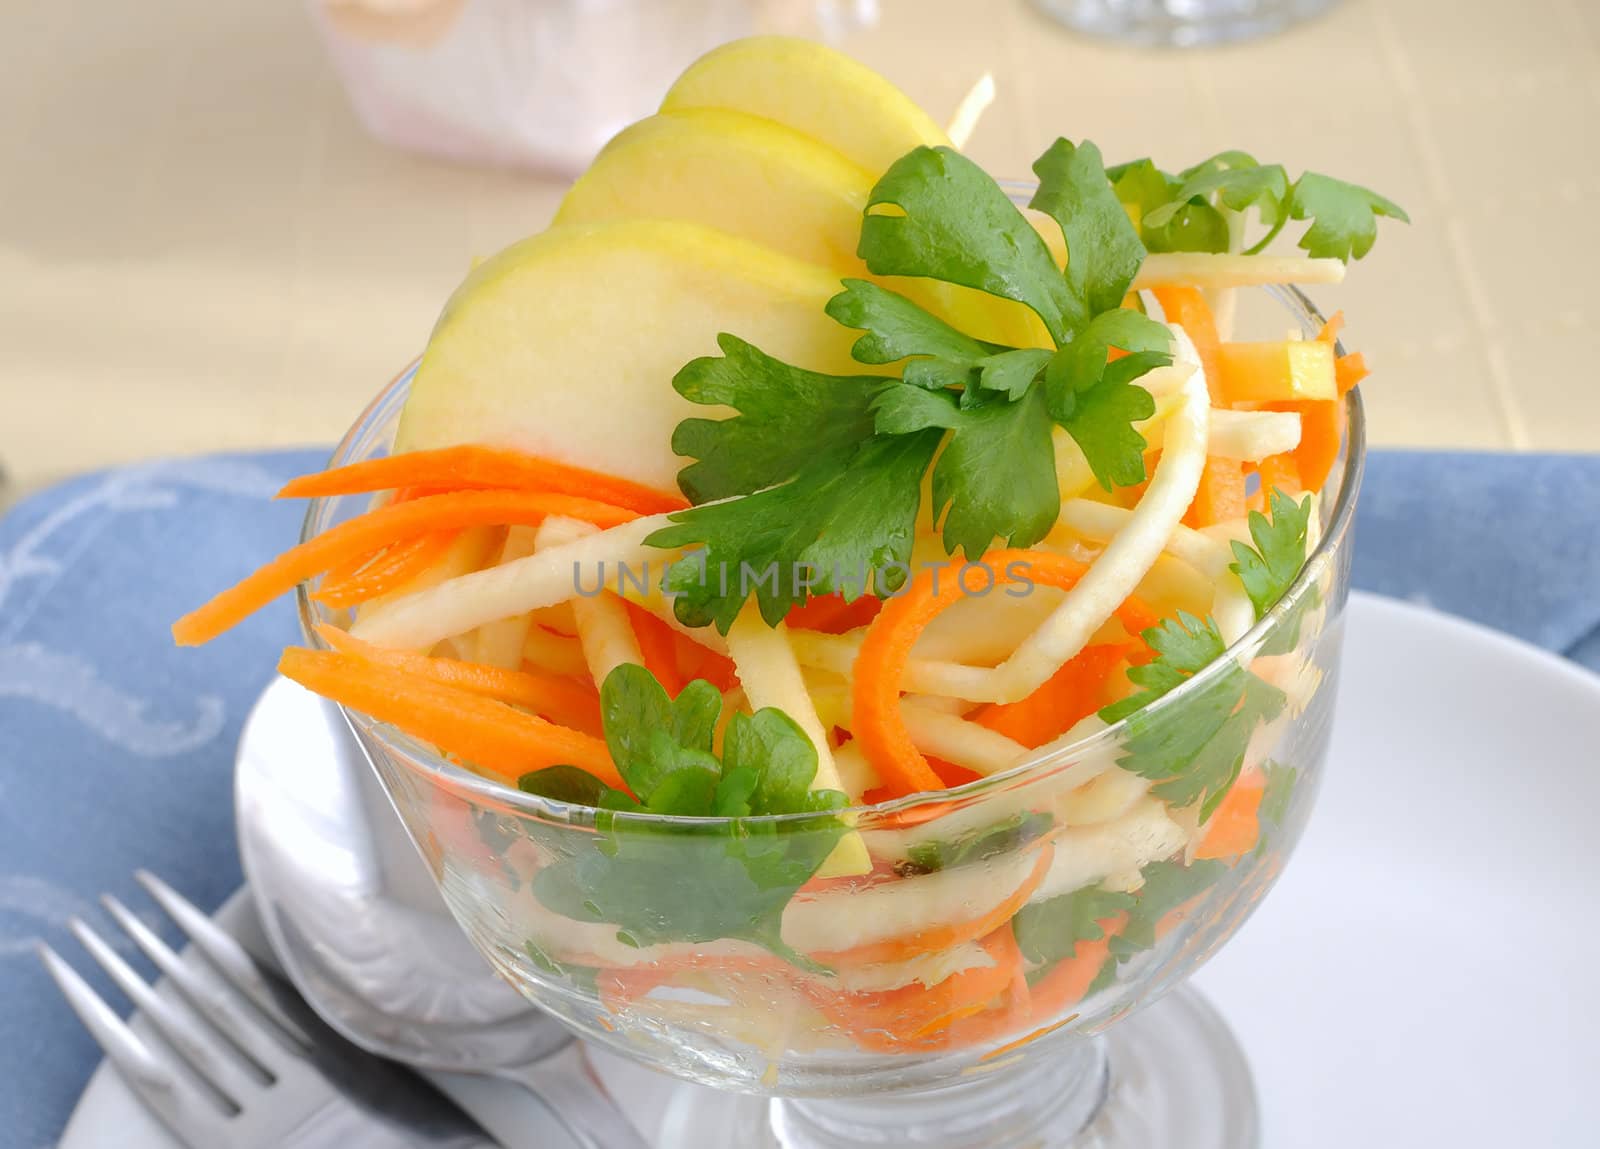 Celery salad with carrot and apple by Apolonia